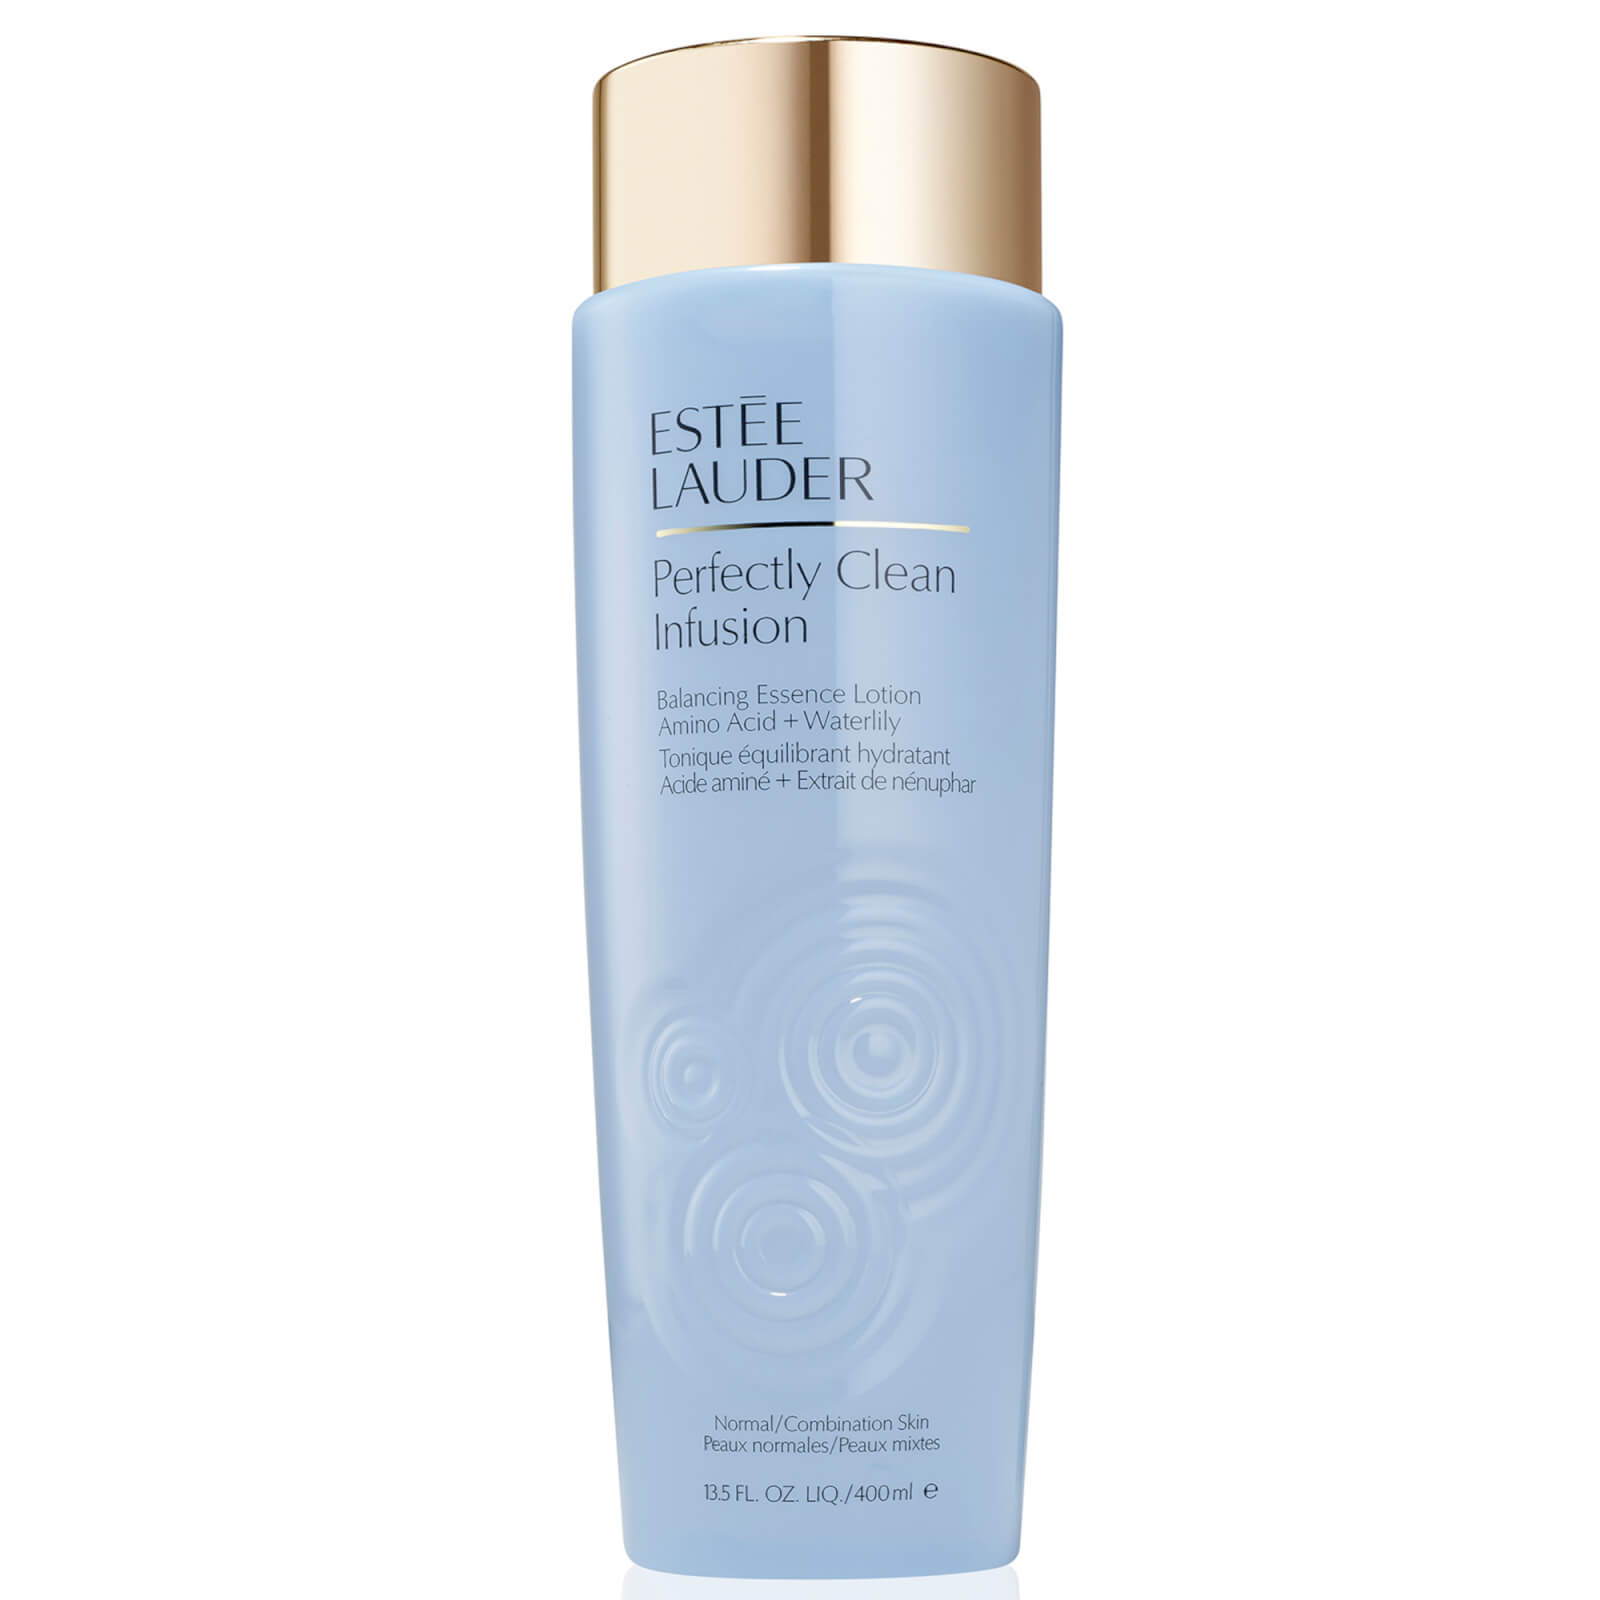 Photos - Cream / Lotion Estee Lauder Perfectly Clean Infusion Balancing Essence Lotion 400ml PT3M0 